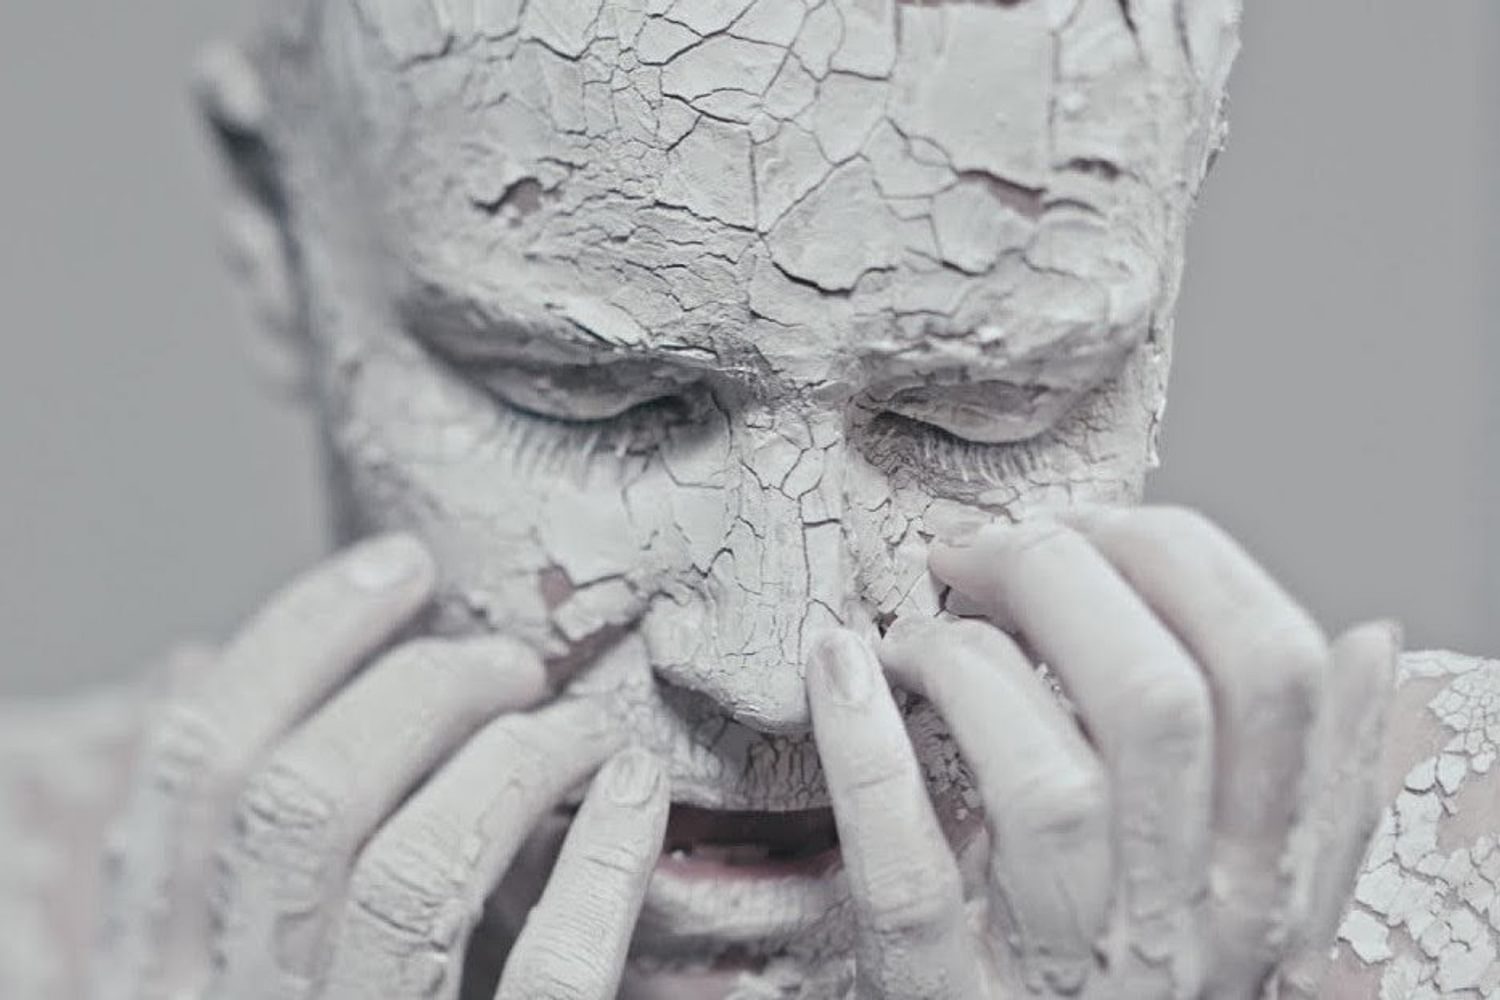 Watch Another Sky’s disturbing, intense video for ‘Avalanche’